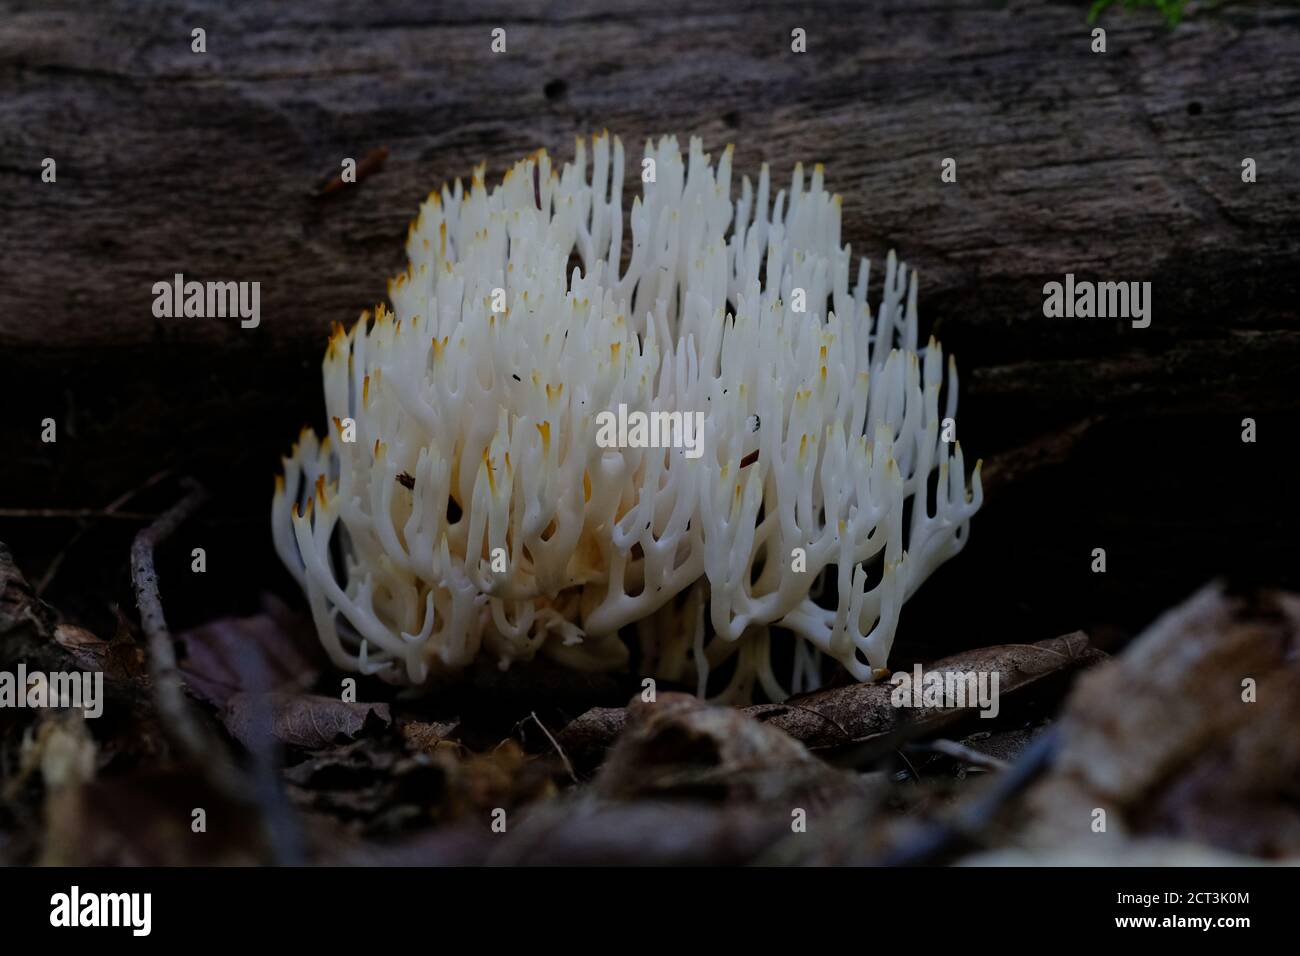 White coral fungus (Clavulina cristata) tucked under a shady log in a Quebec forest, Val-des-Monts, Canada. Stock Photo